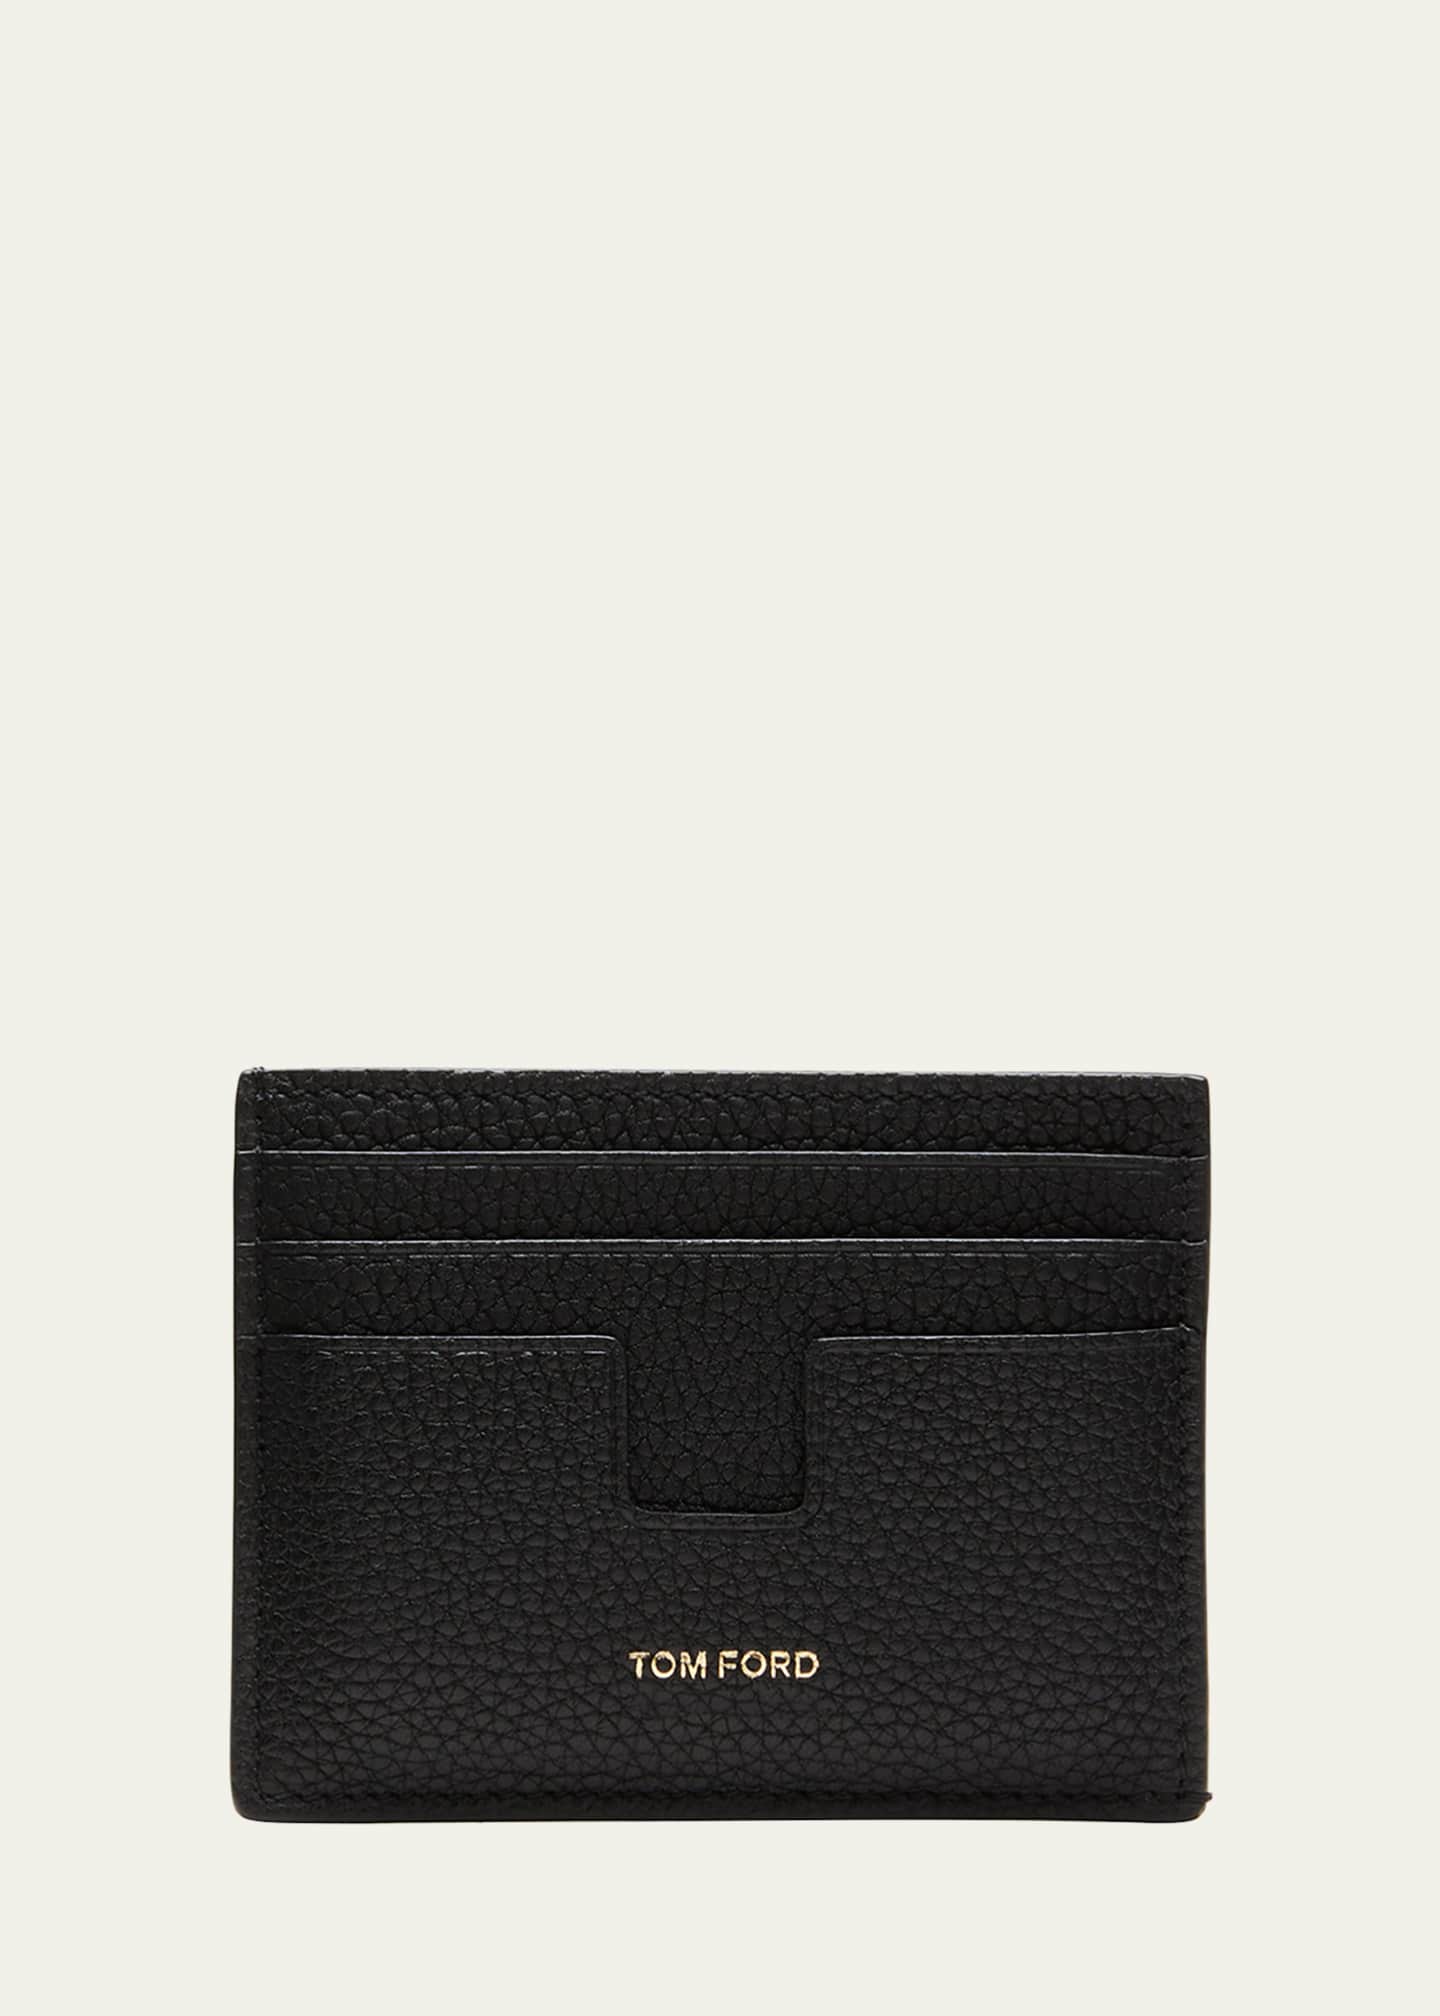 TOM FORD Men's Open Leather Card - Bergdorf Goodman